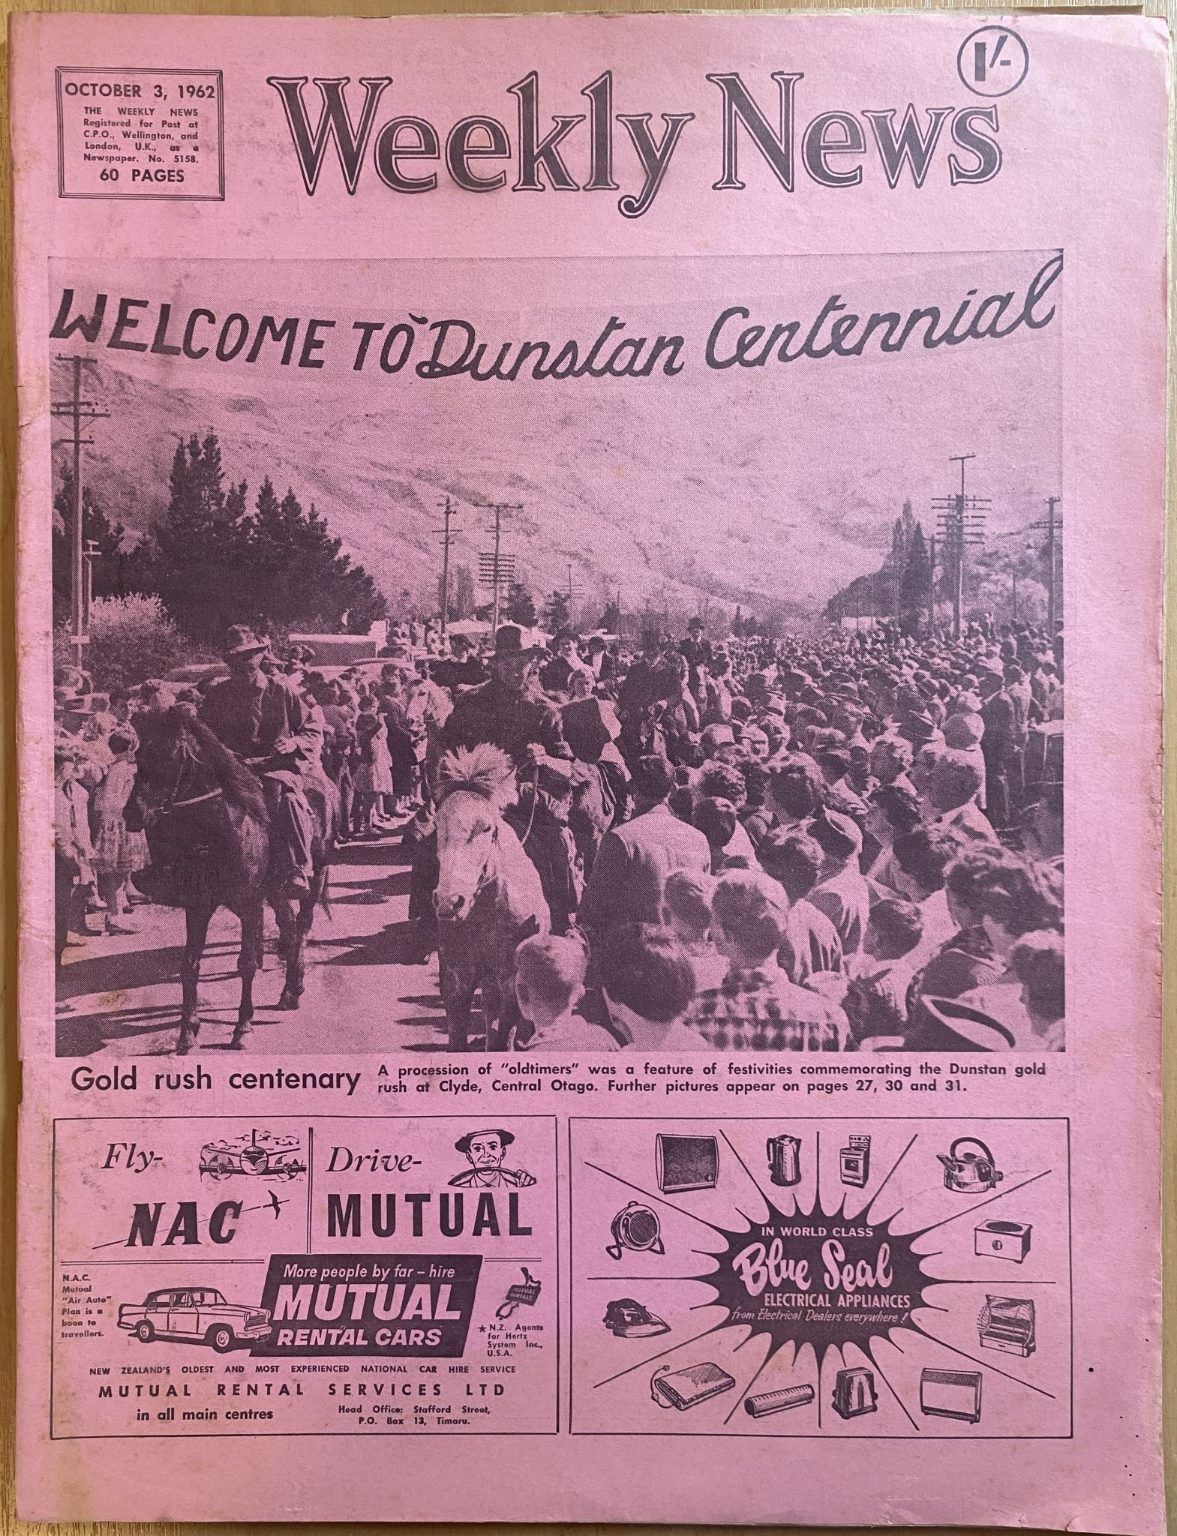 OLD NEWSPAPER: The Weekly News, No. 5158, 3 October 1962